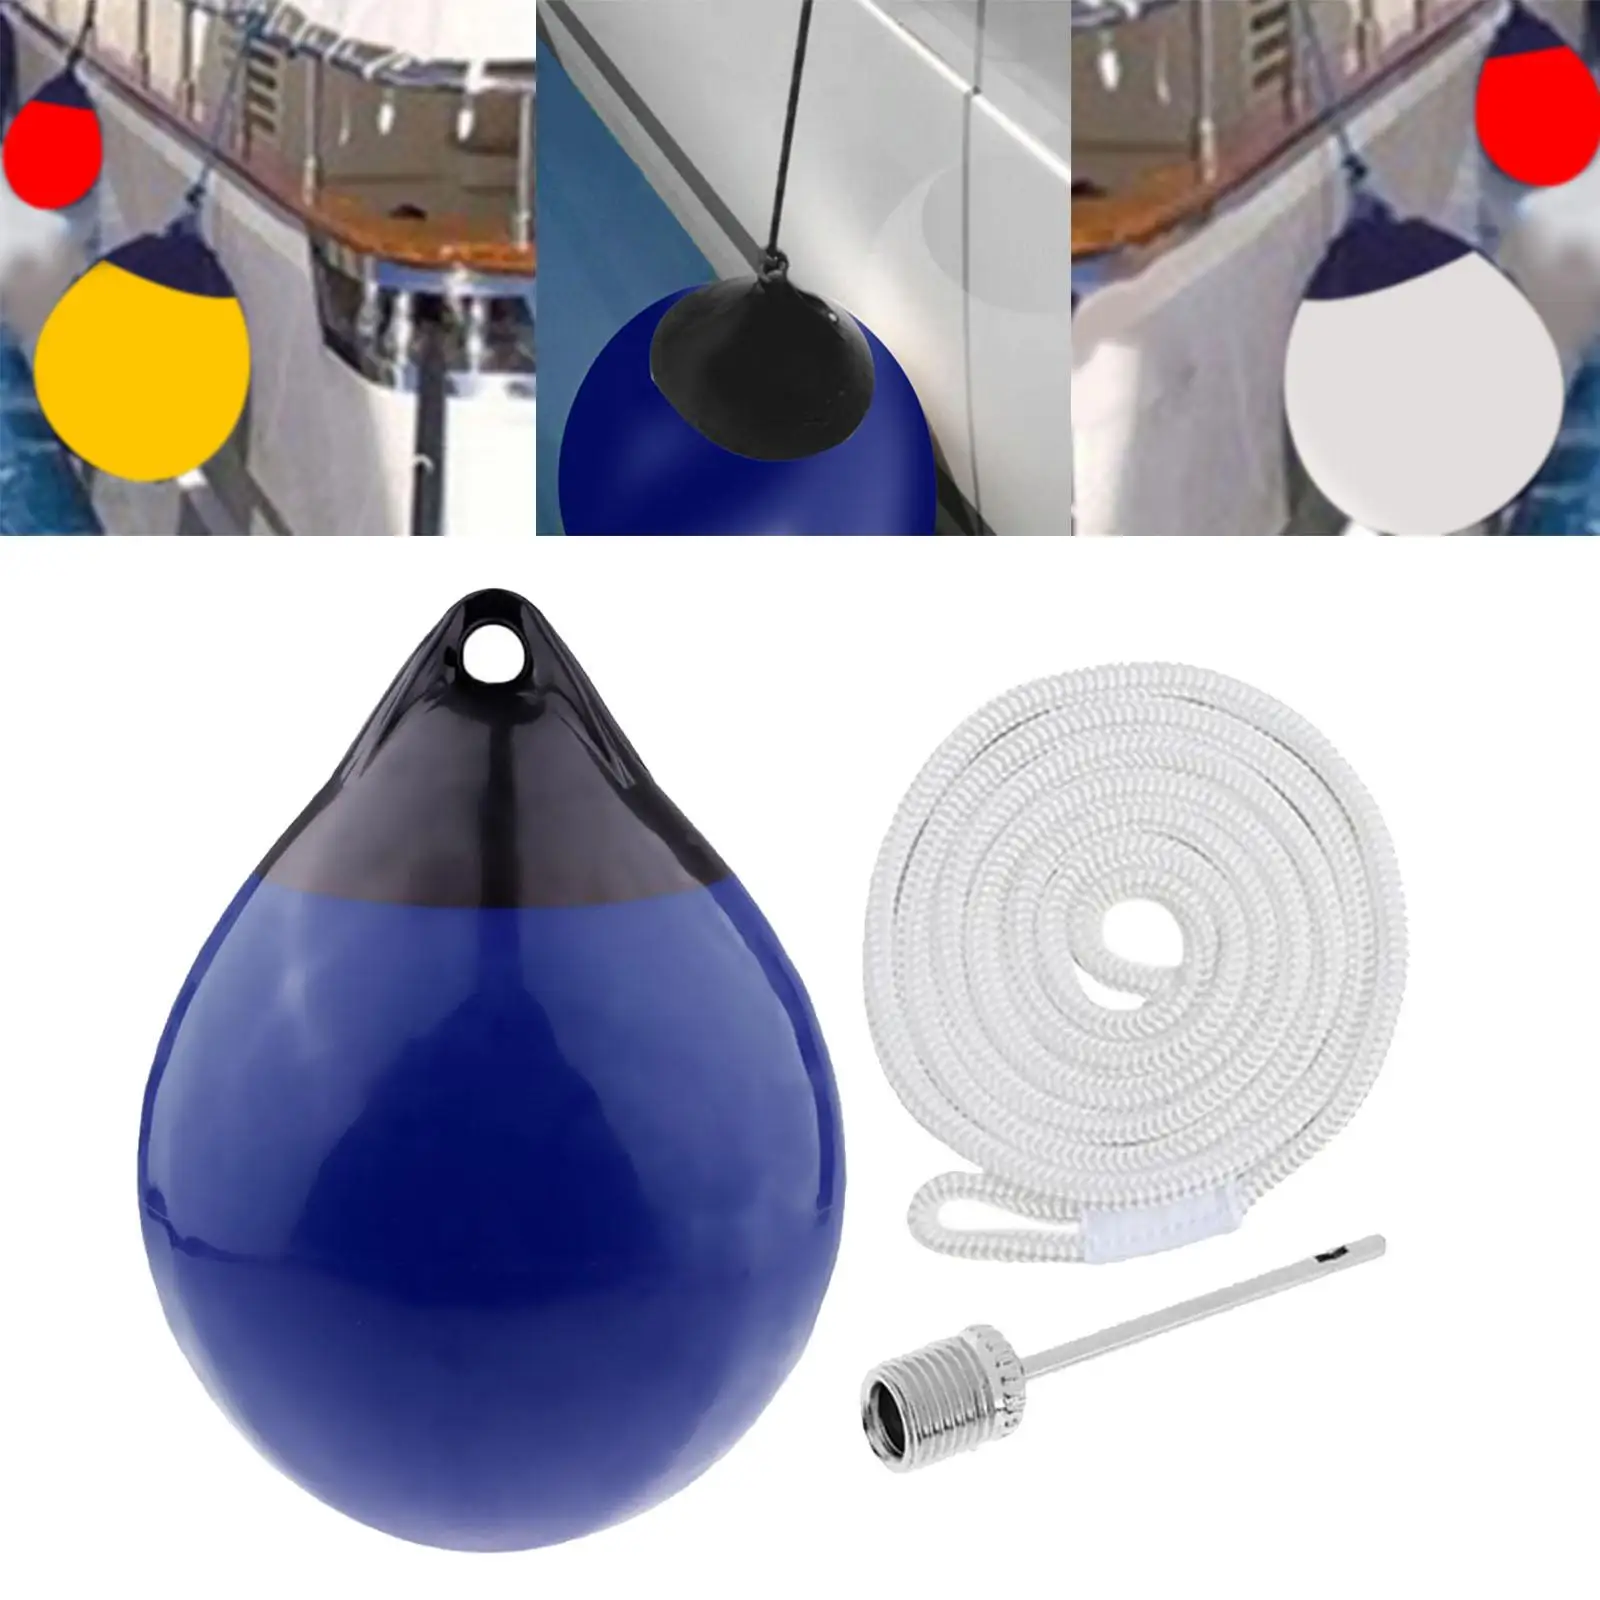 Boat Ball, Marine Mooring Buoy, Inflatable Dock Edge Anti Collision Anchor Buoy Dock Float for Boat Accessories